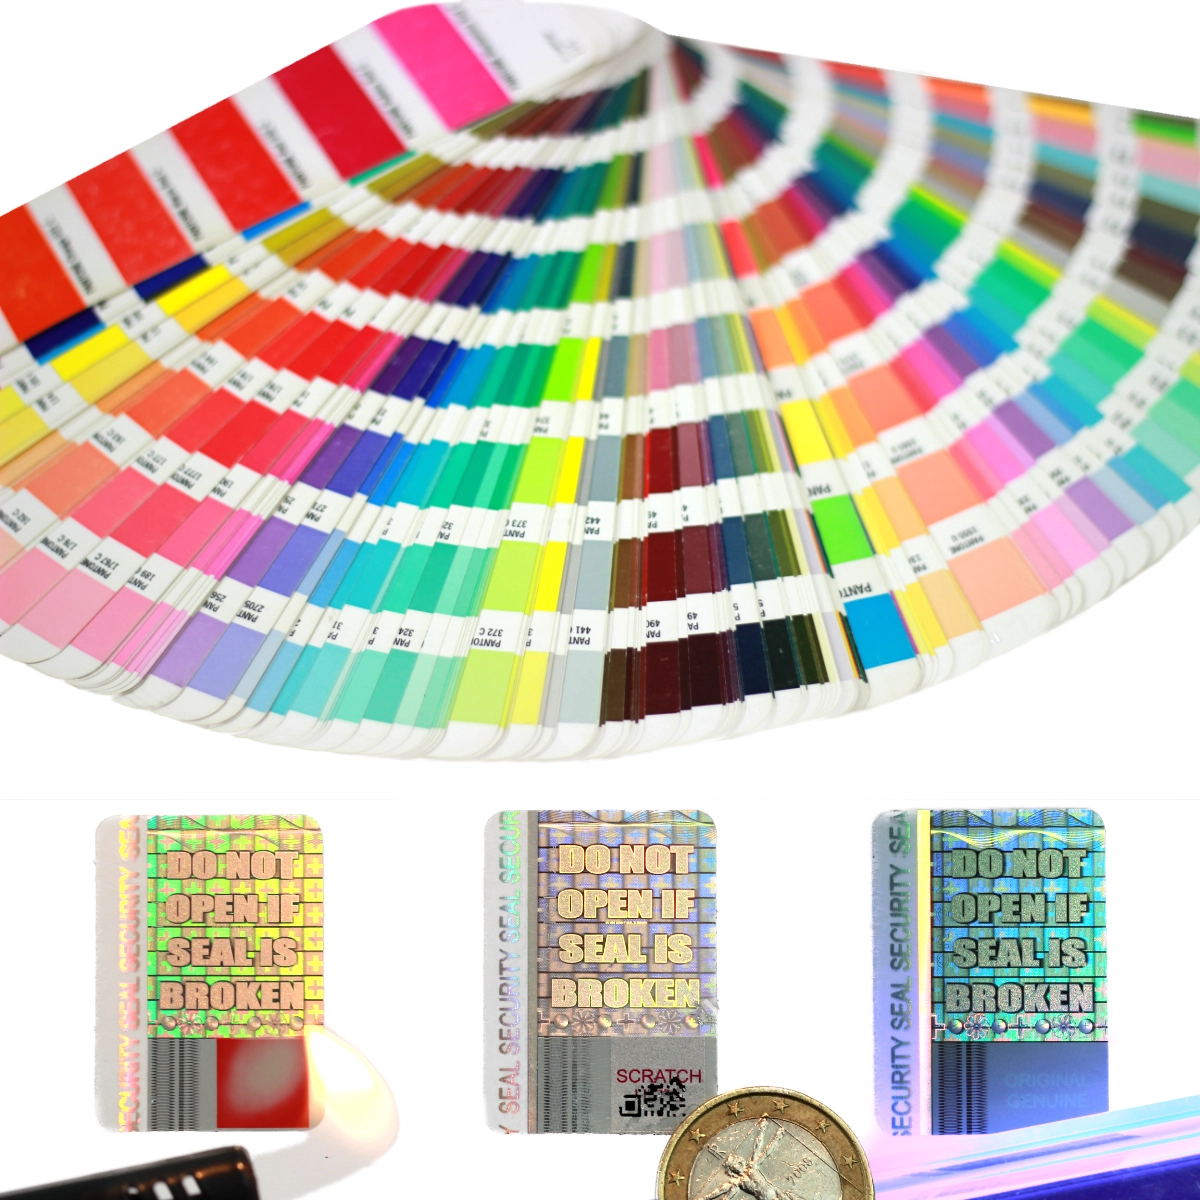 SAFETY PIGMENTS AND SPECIAL PRINT as an additional safety feature in many different colors